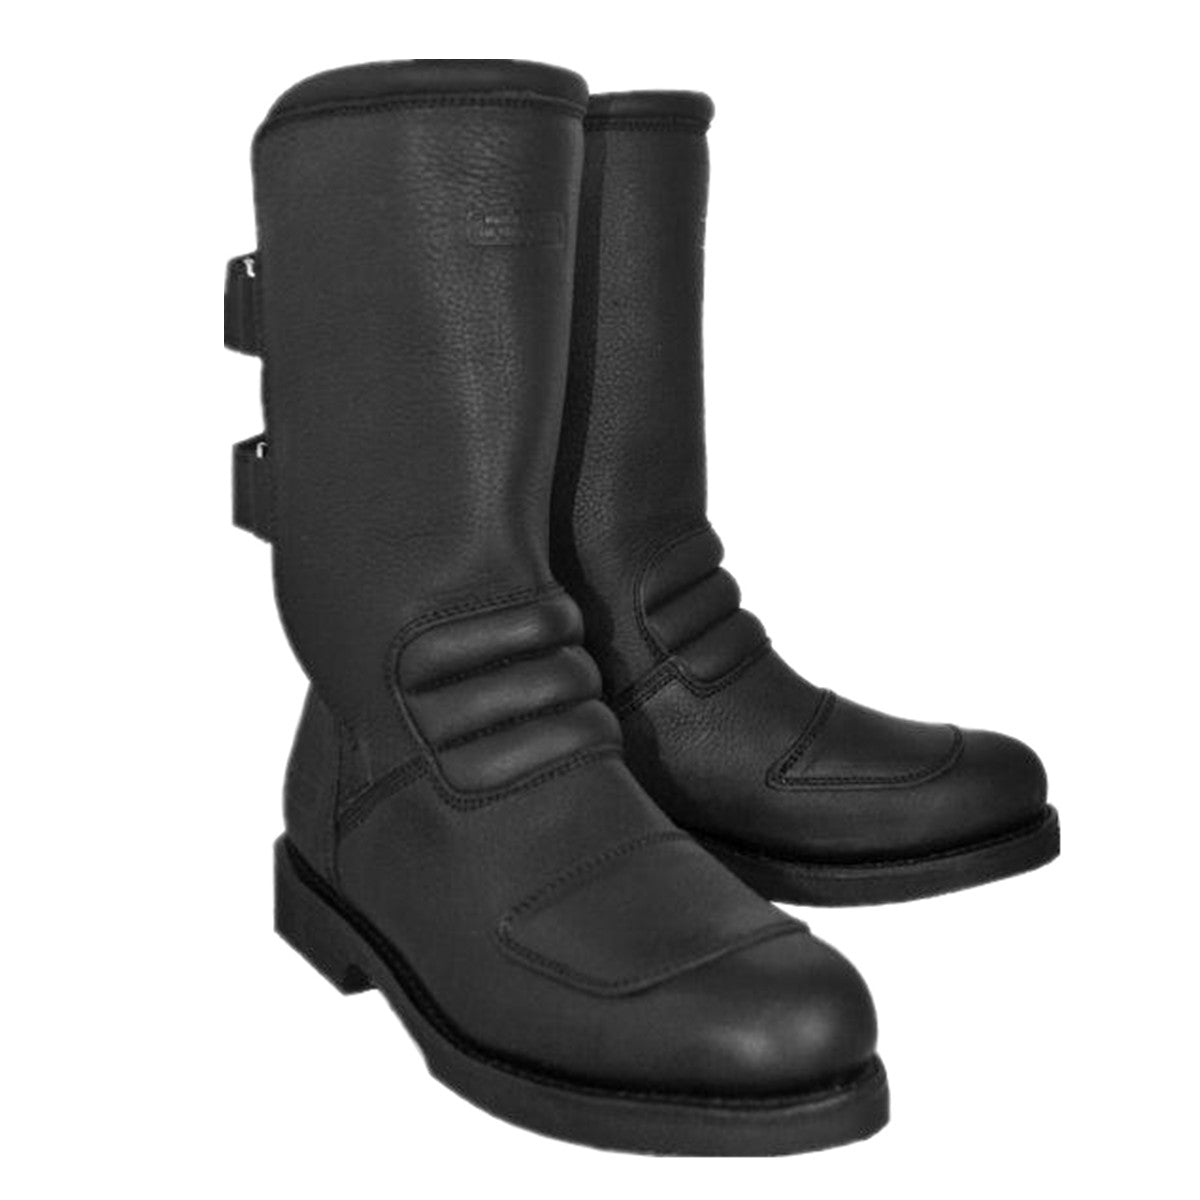 Men's Motorcycle Boots (Dual Strap) - SM004